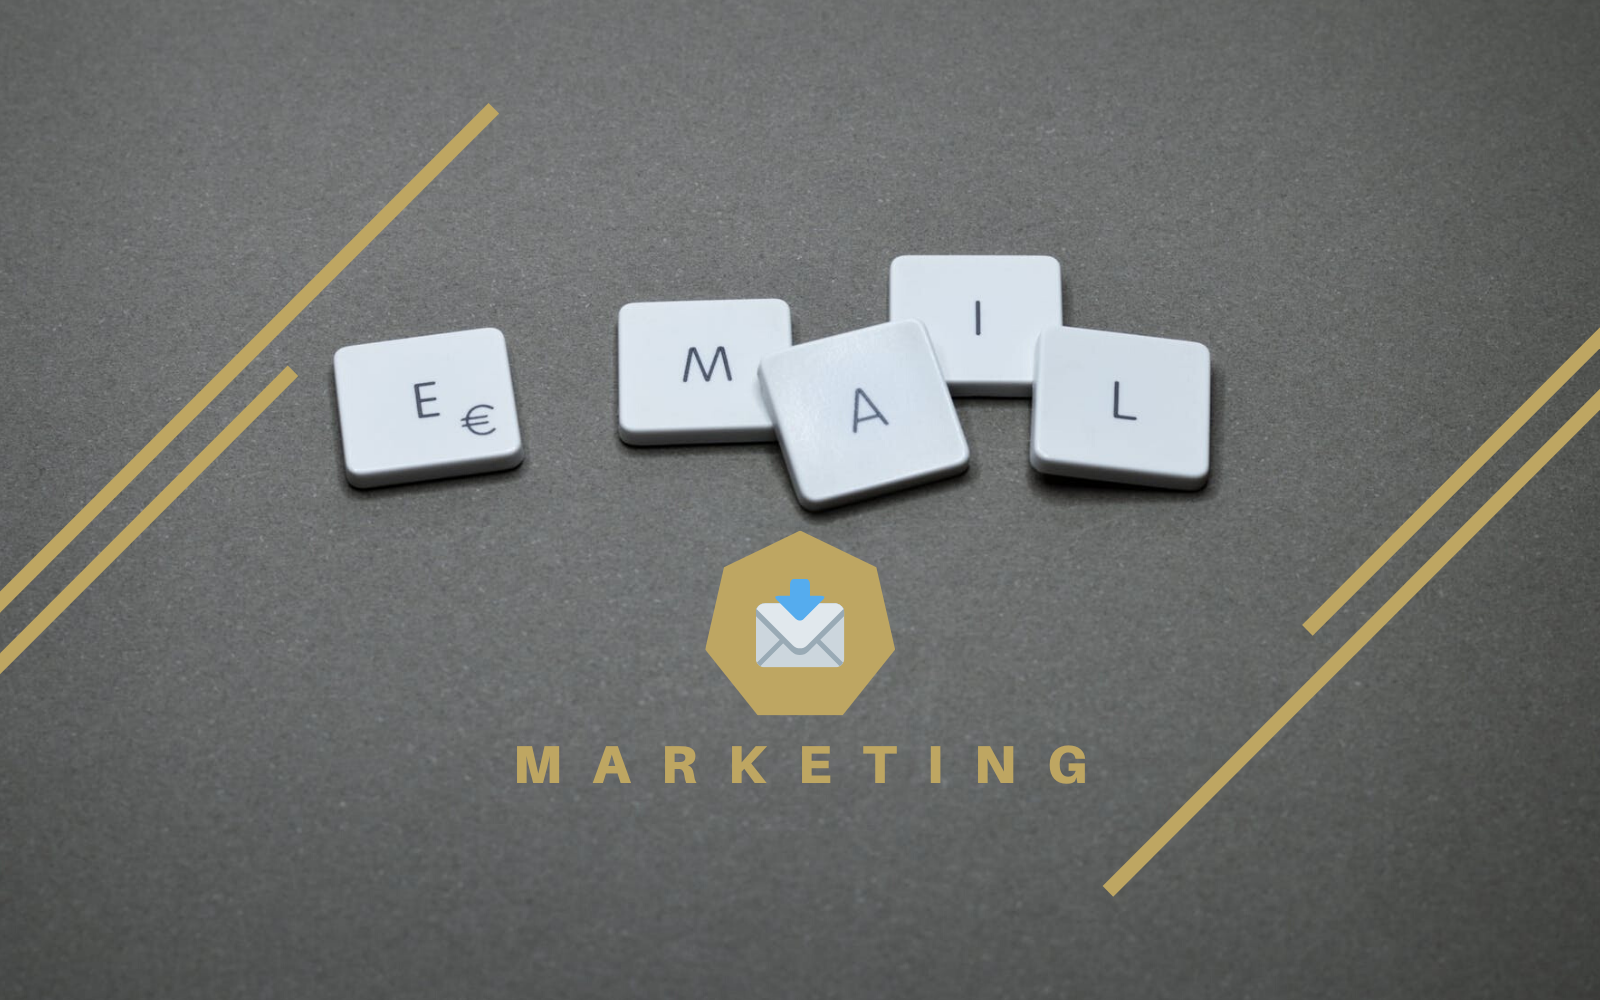 9 Effective Email Marketing Tips That’ll Help You Generate More Leads and Revenue